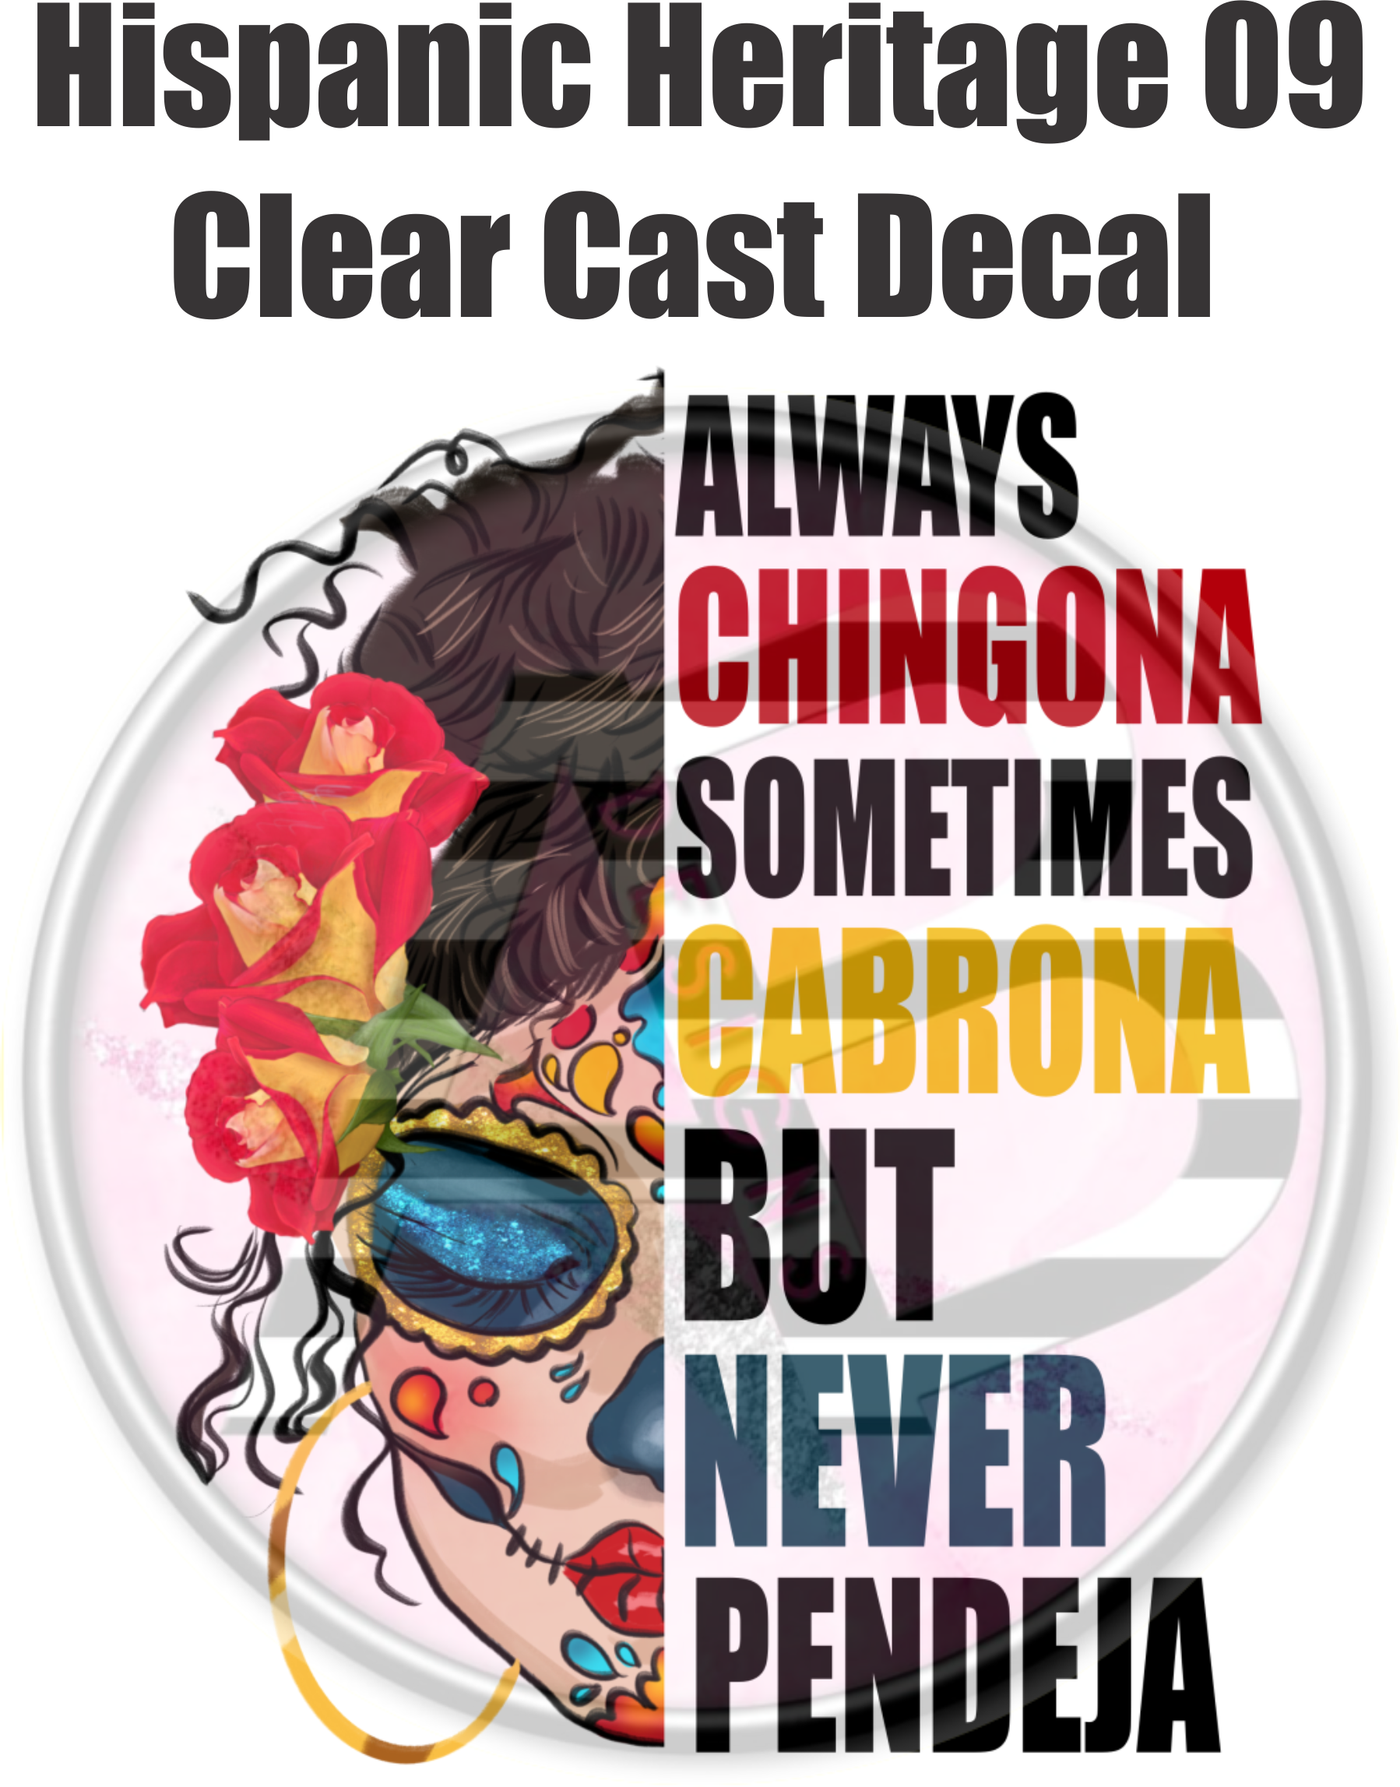 Hispanic Heritage 09 - Clear Cast Decal